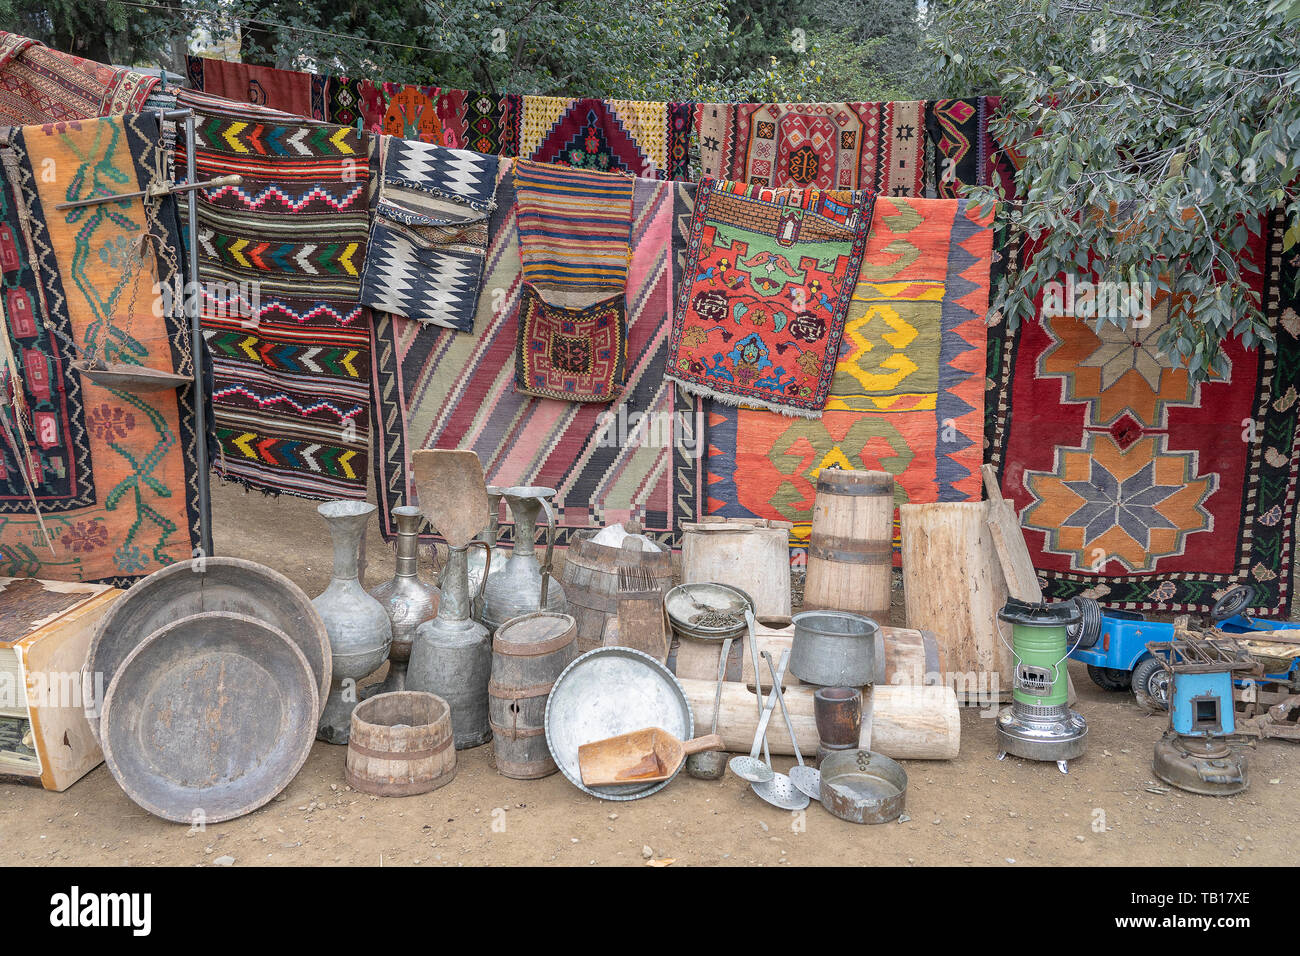 https://c8.alamy.com/comp/TB17XE/old-carpets-metal-jugs-wooden-barrels-and-other-kitchen-utensils-are-sold-at-a-flea-market-in-tbilisi-georgia-TB17XE.jpg